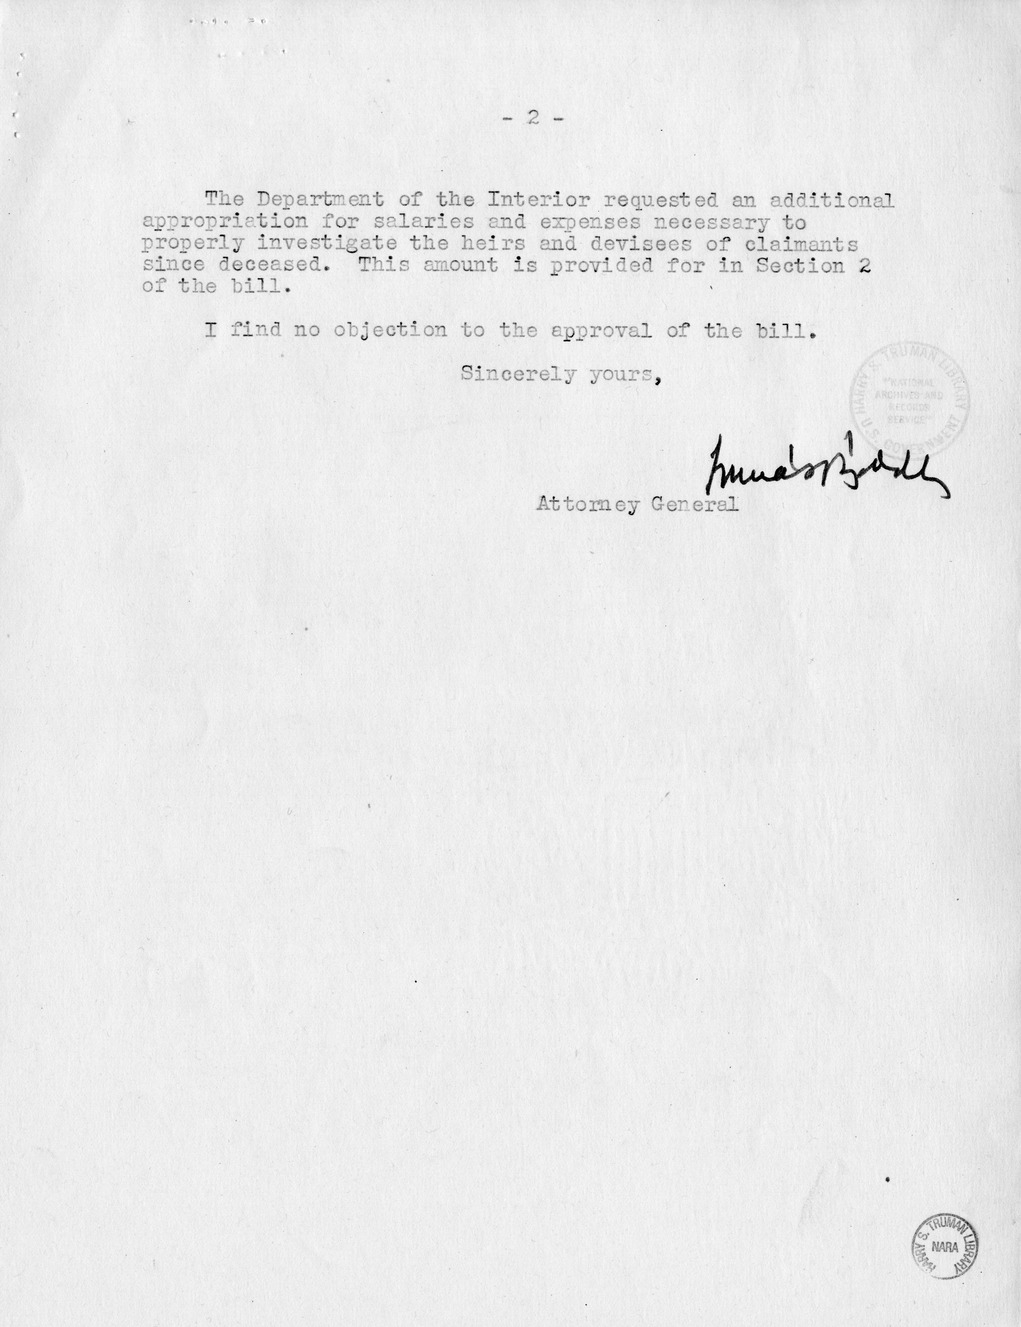 Memorandum from Harold D. Smith to M. C. Latta, H.R. 378, Authorizing an Appropriation to Carry Out the Provisions of the Act of May 3, 1928 (45 Stat. 484), and for Other Purposes, with Attachments